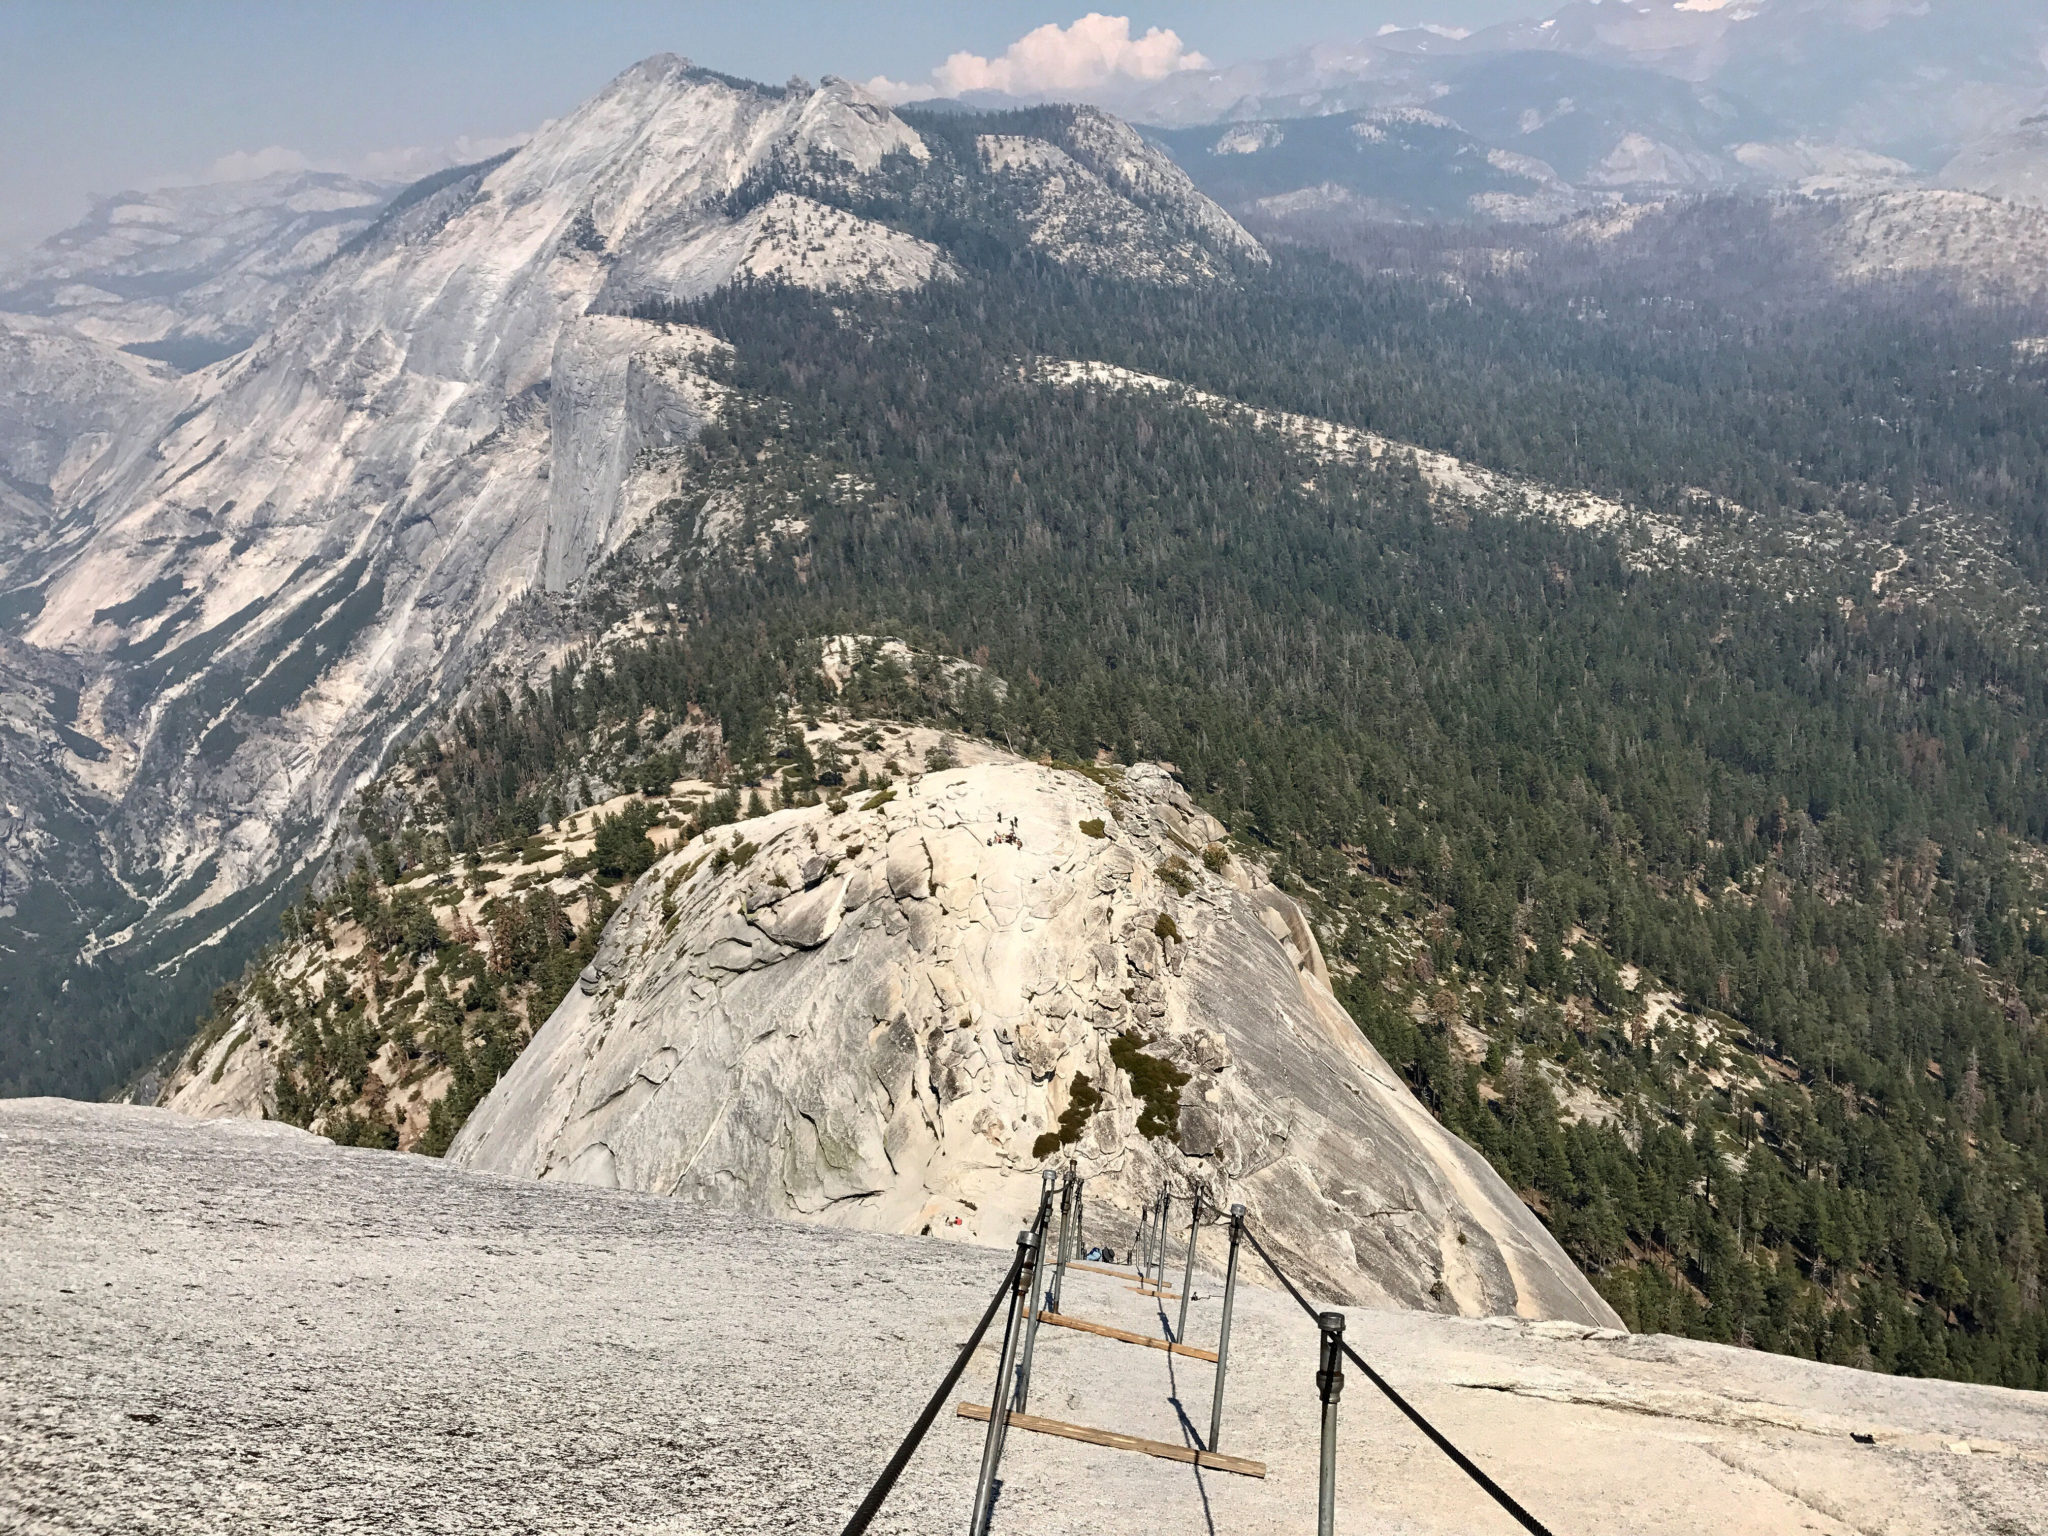 Cables on Half Dome